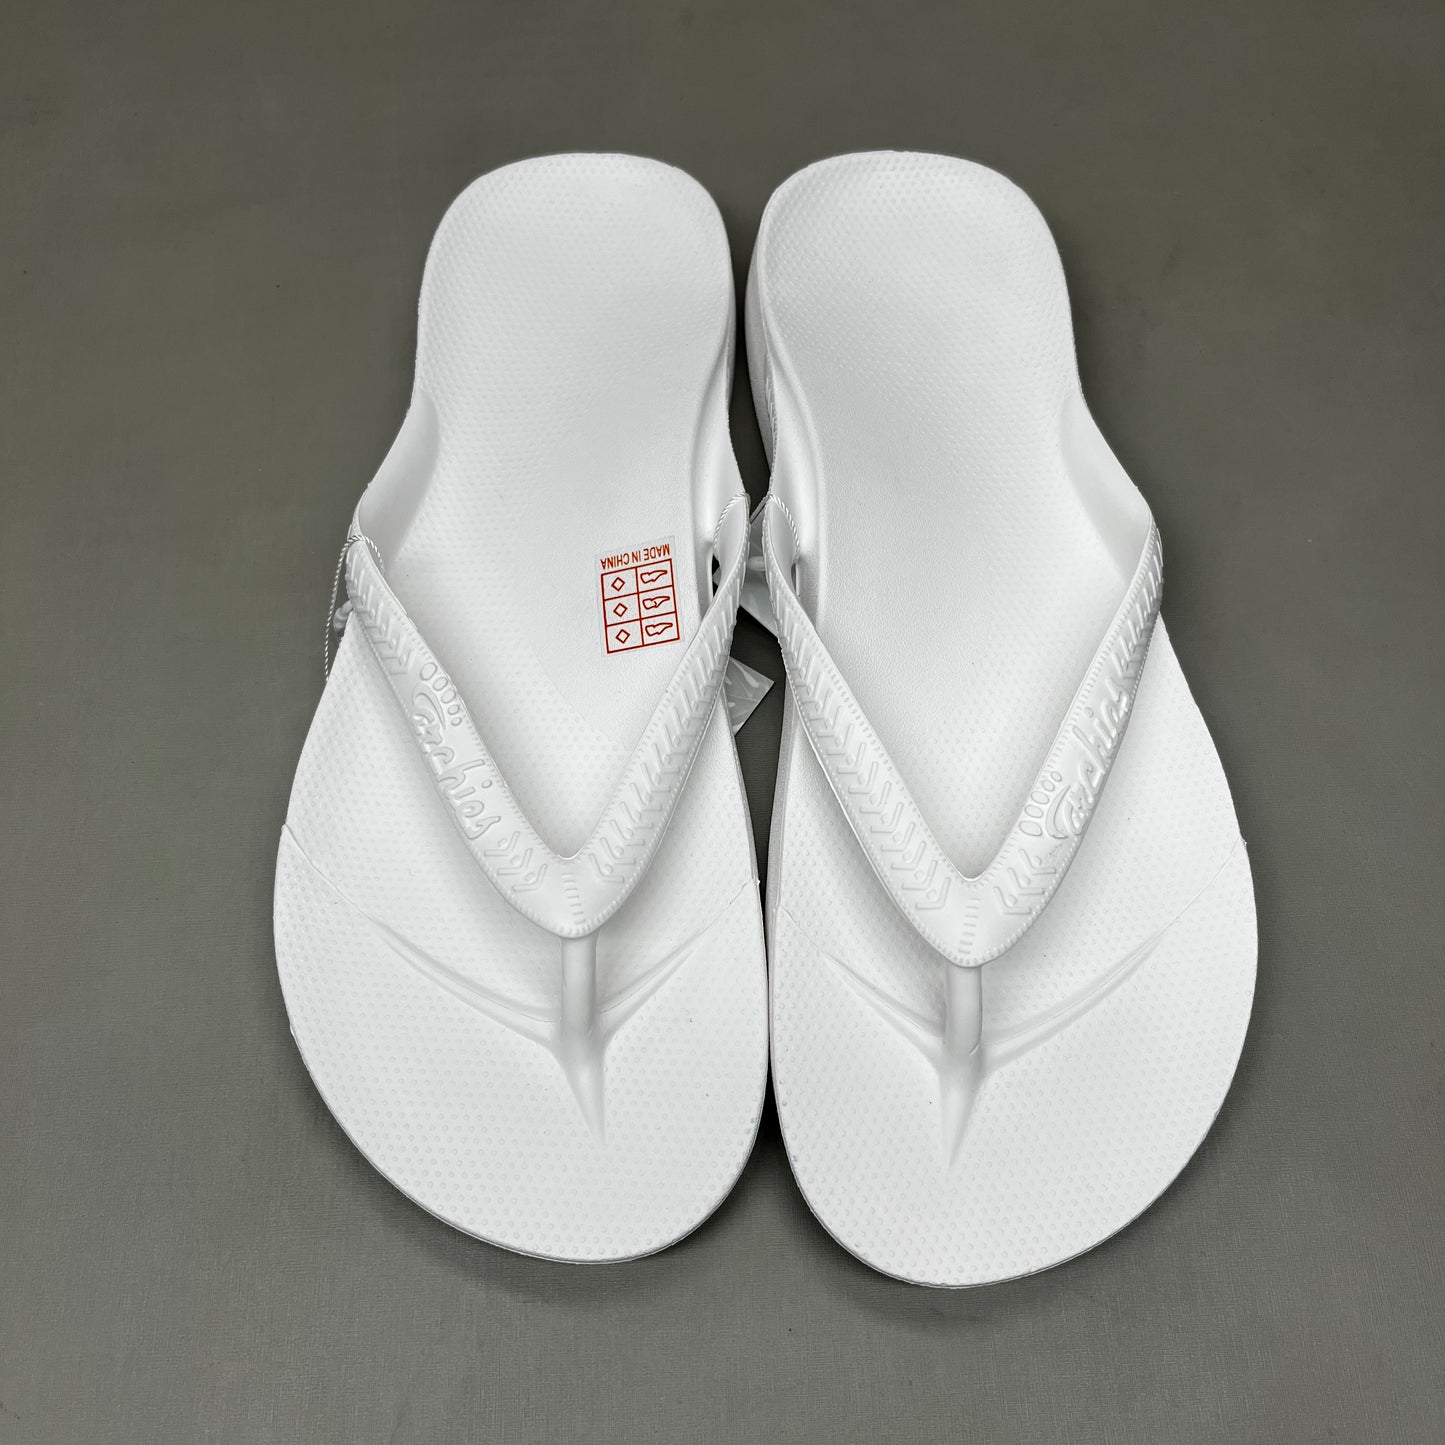 ARCHIES Arch Support Thongs HIGH SUPPORT Flip Flops Wmn's Sz 5 Men's Sz 4 White (New)